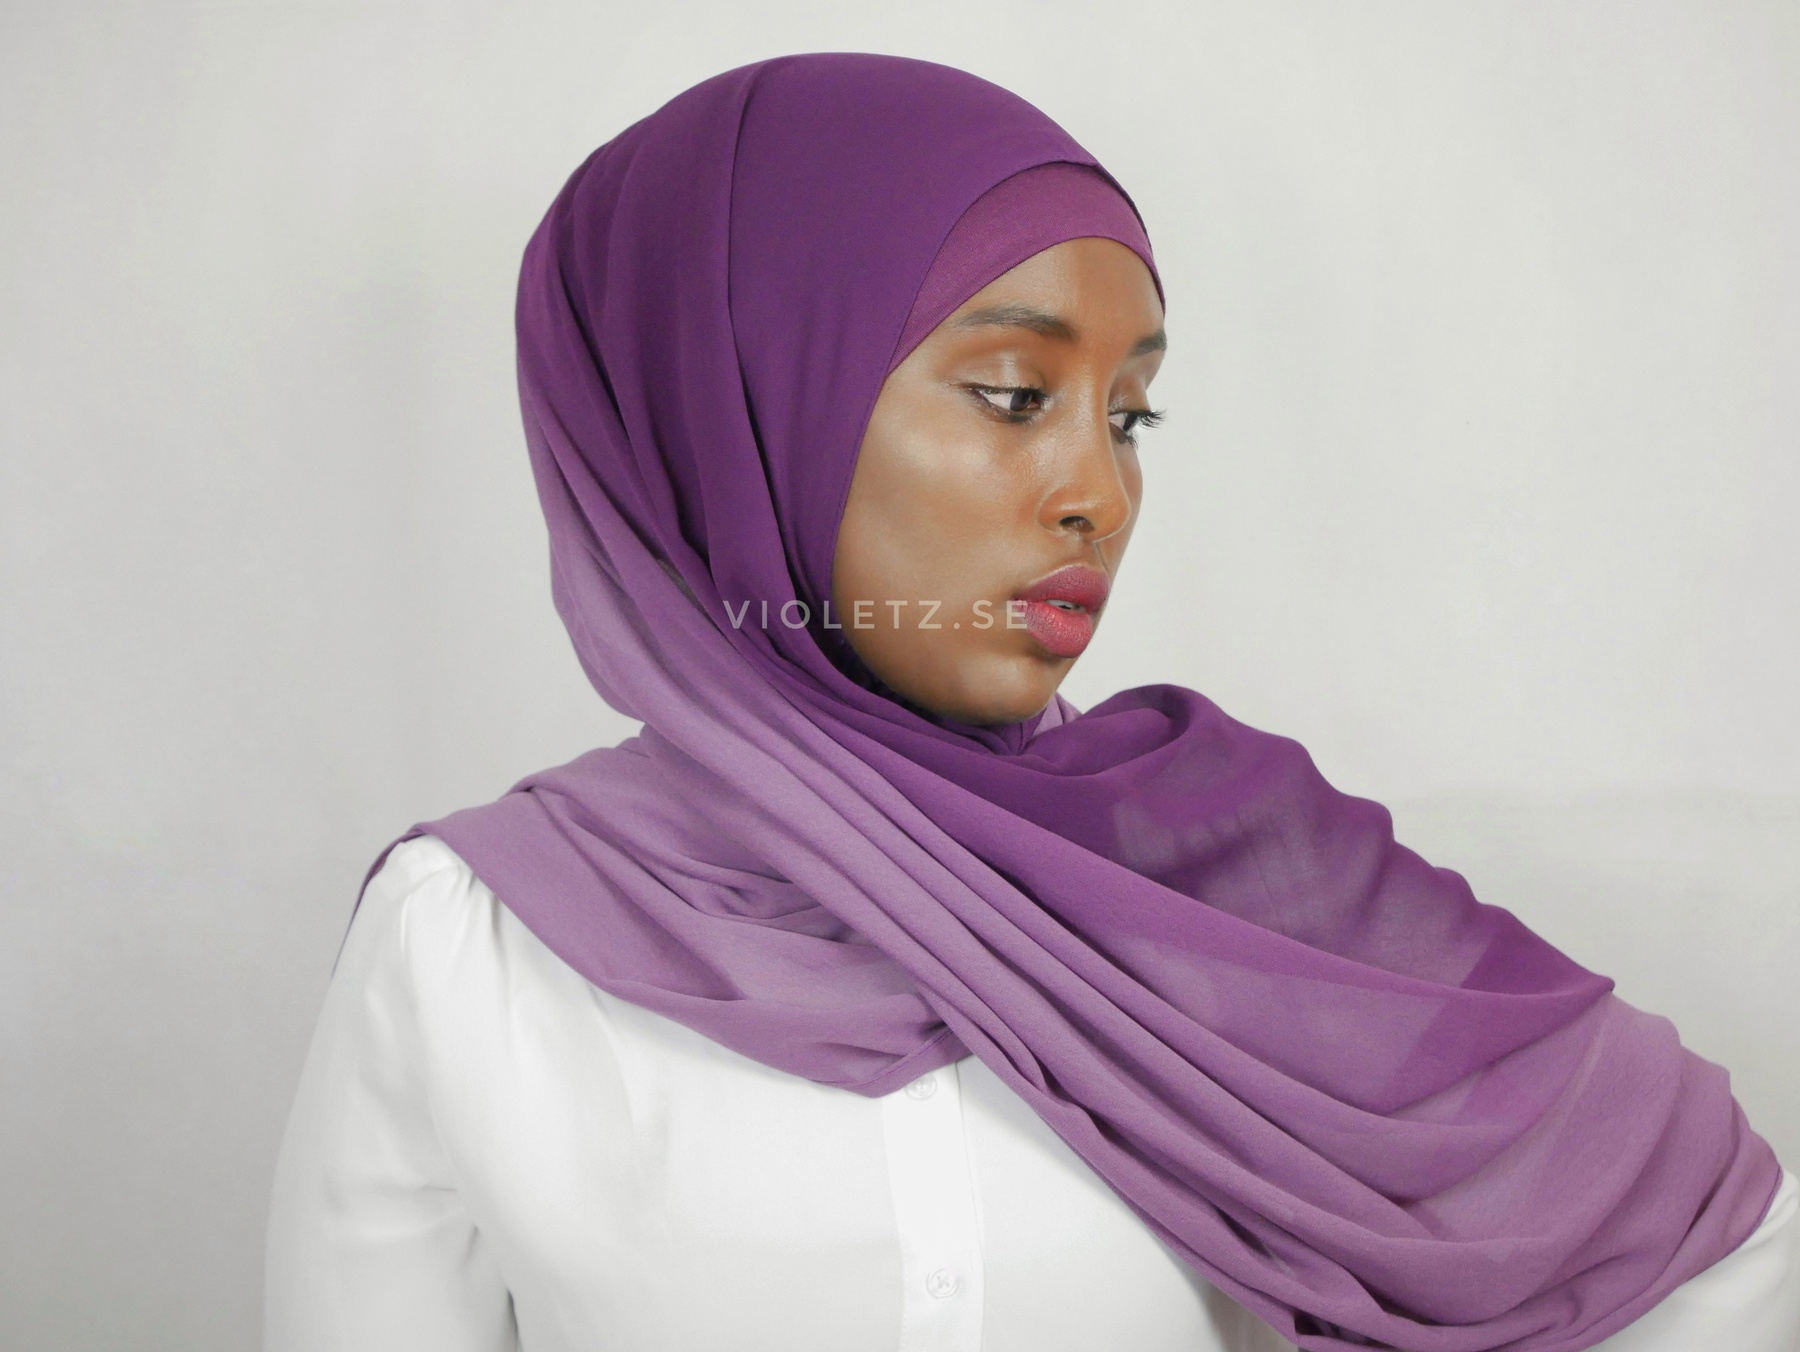 Instant Chiffong hijab med undersjal - ombré lila